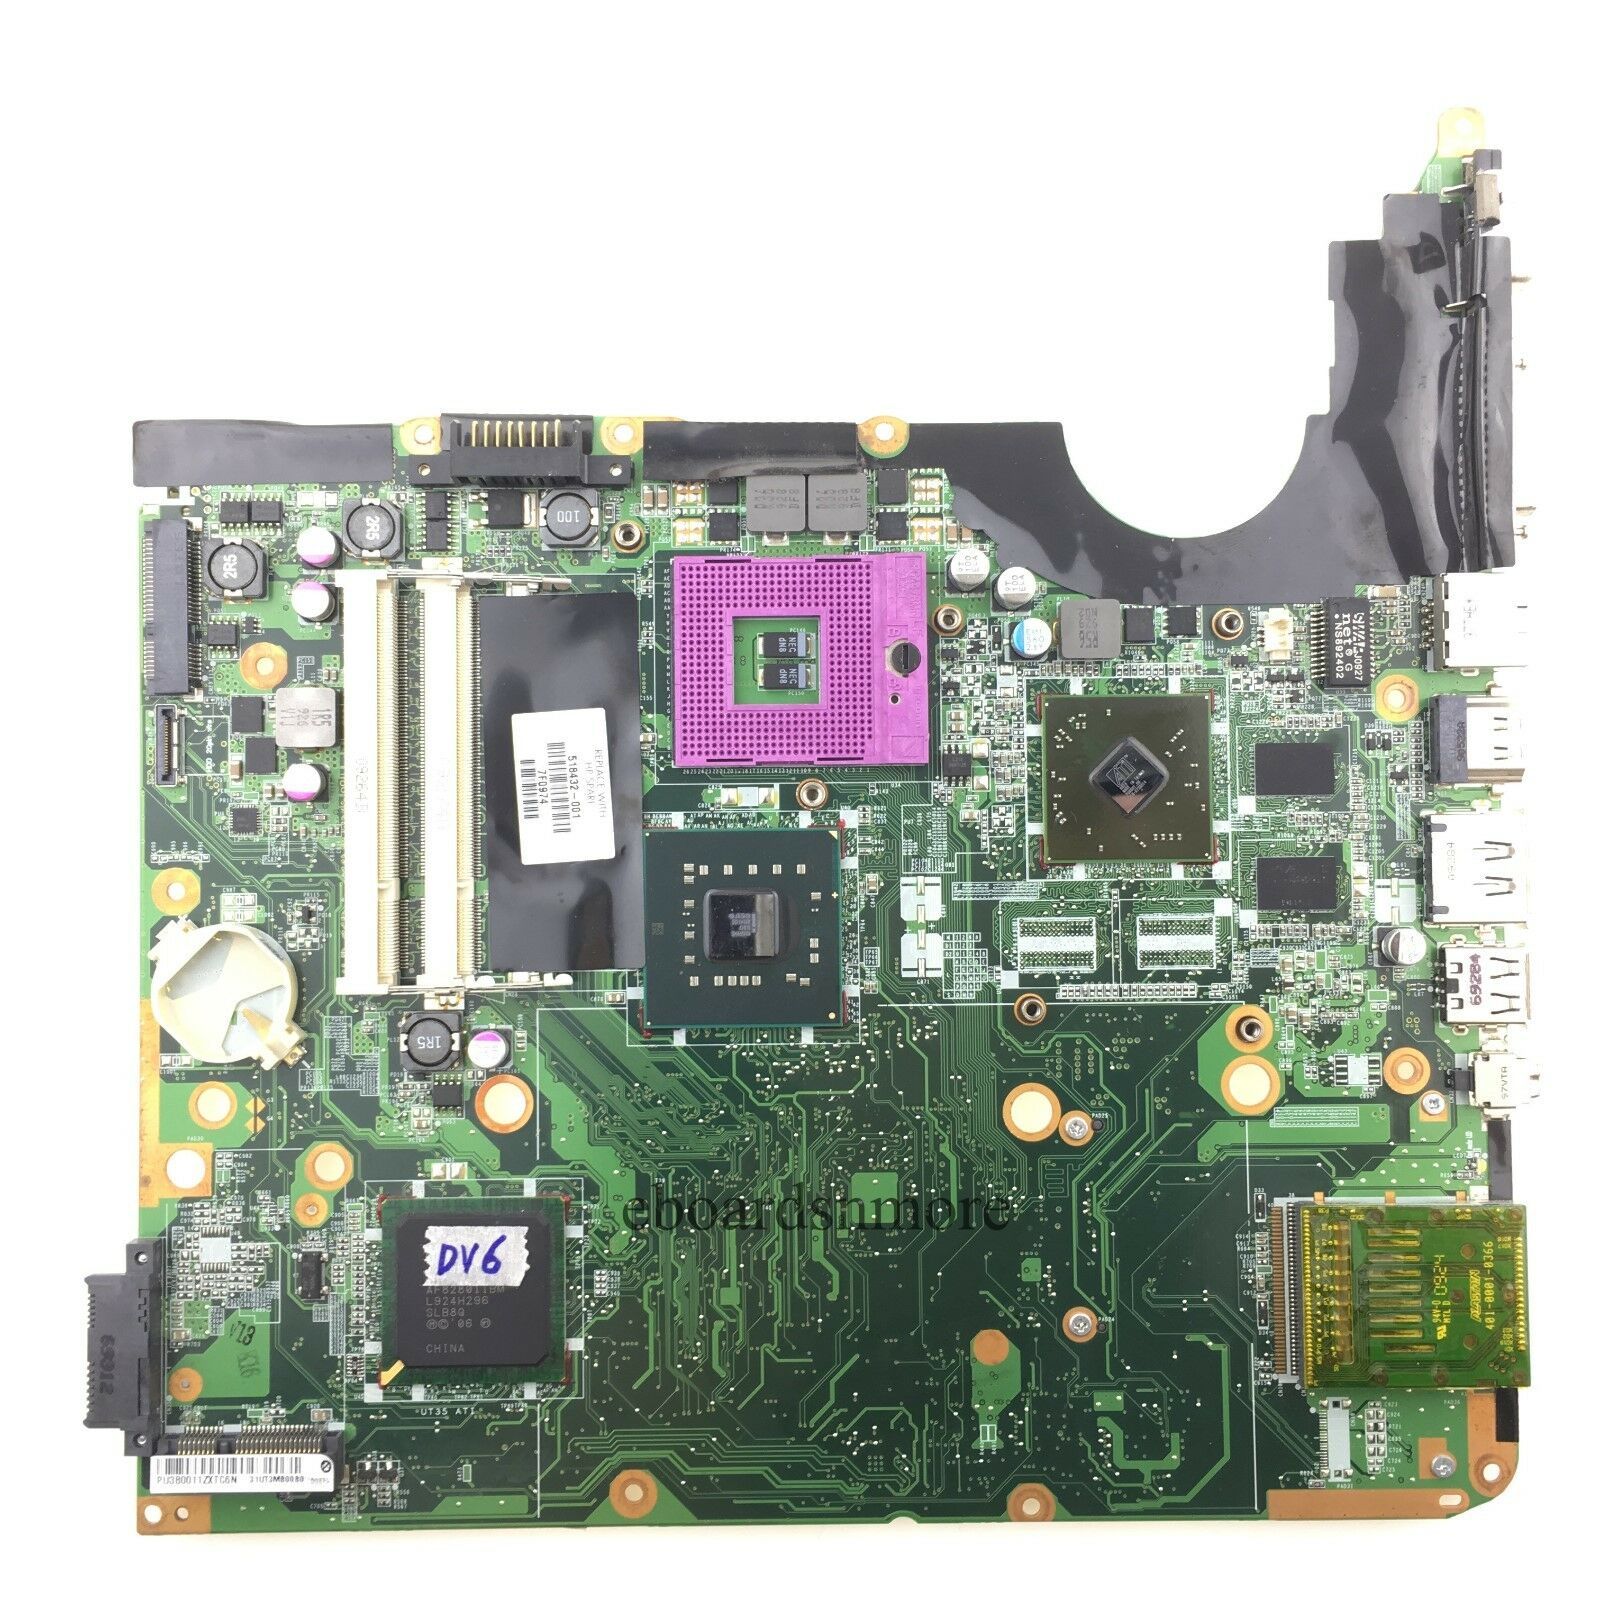 518432-001 for HP DV6 Series Intel motherboard with ATI Radeon Graphics Grade A Compatible CPU Brand: Intel - Click Image to Close